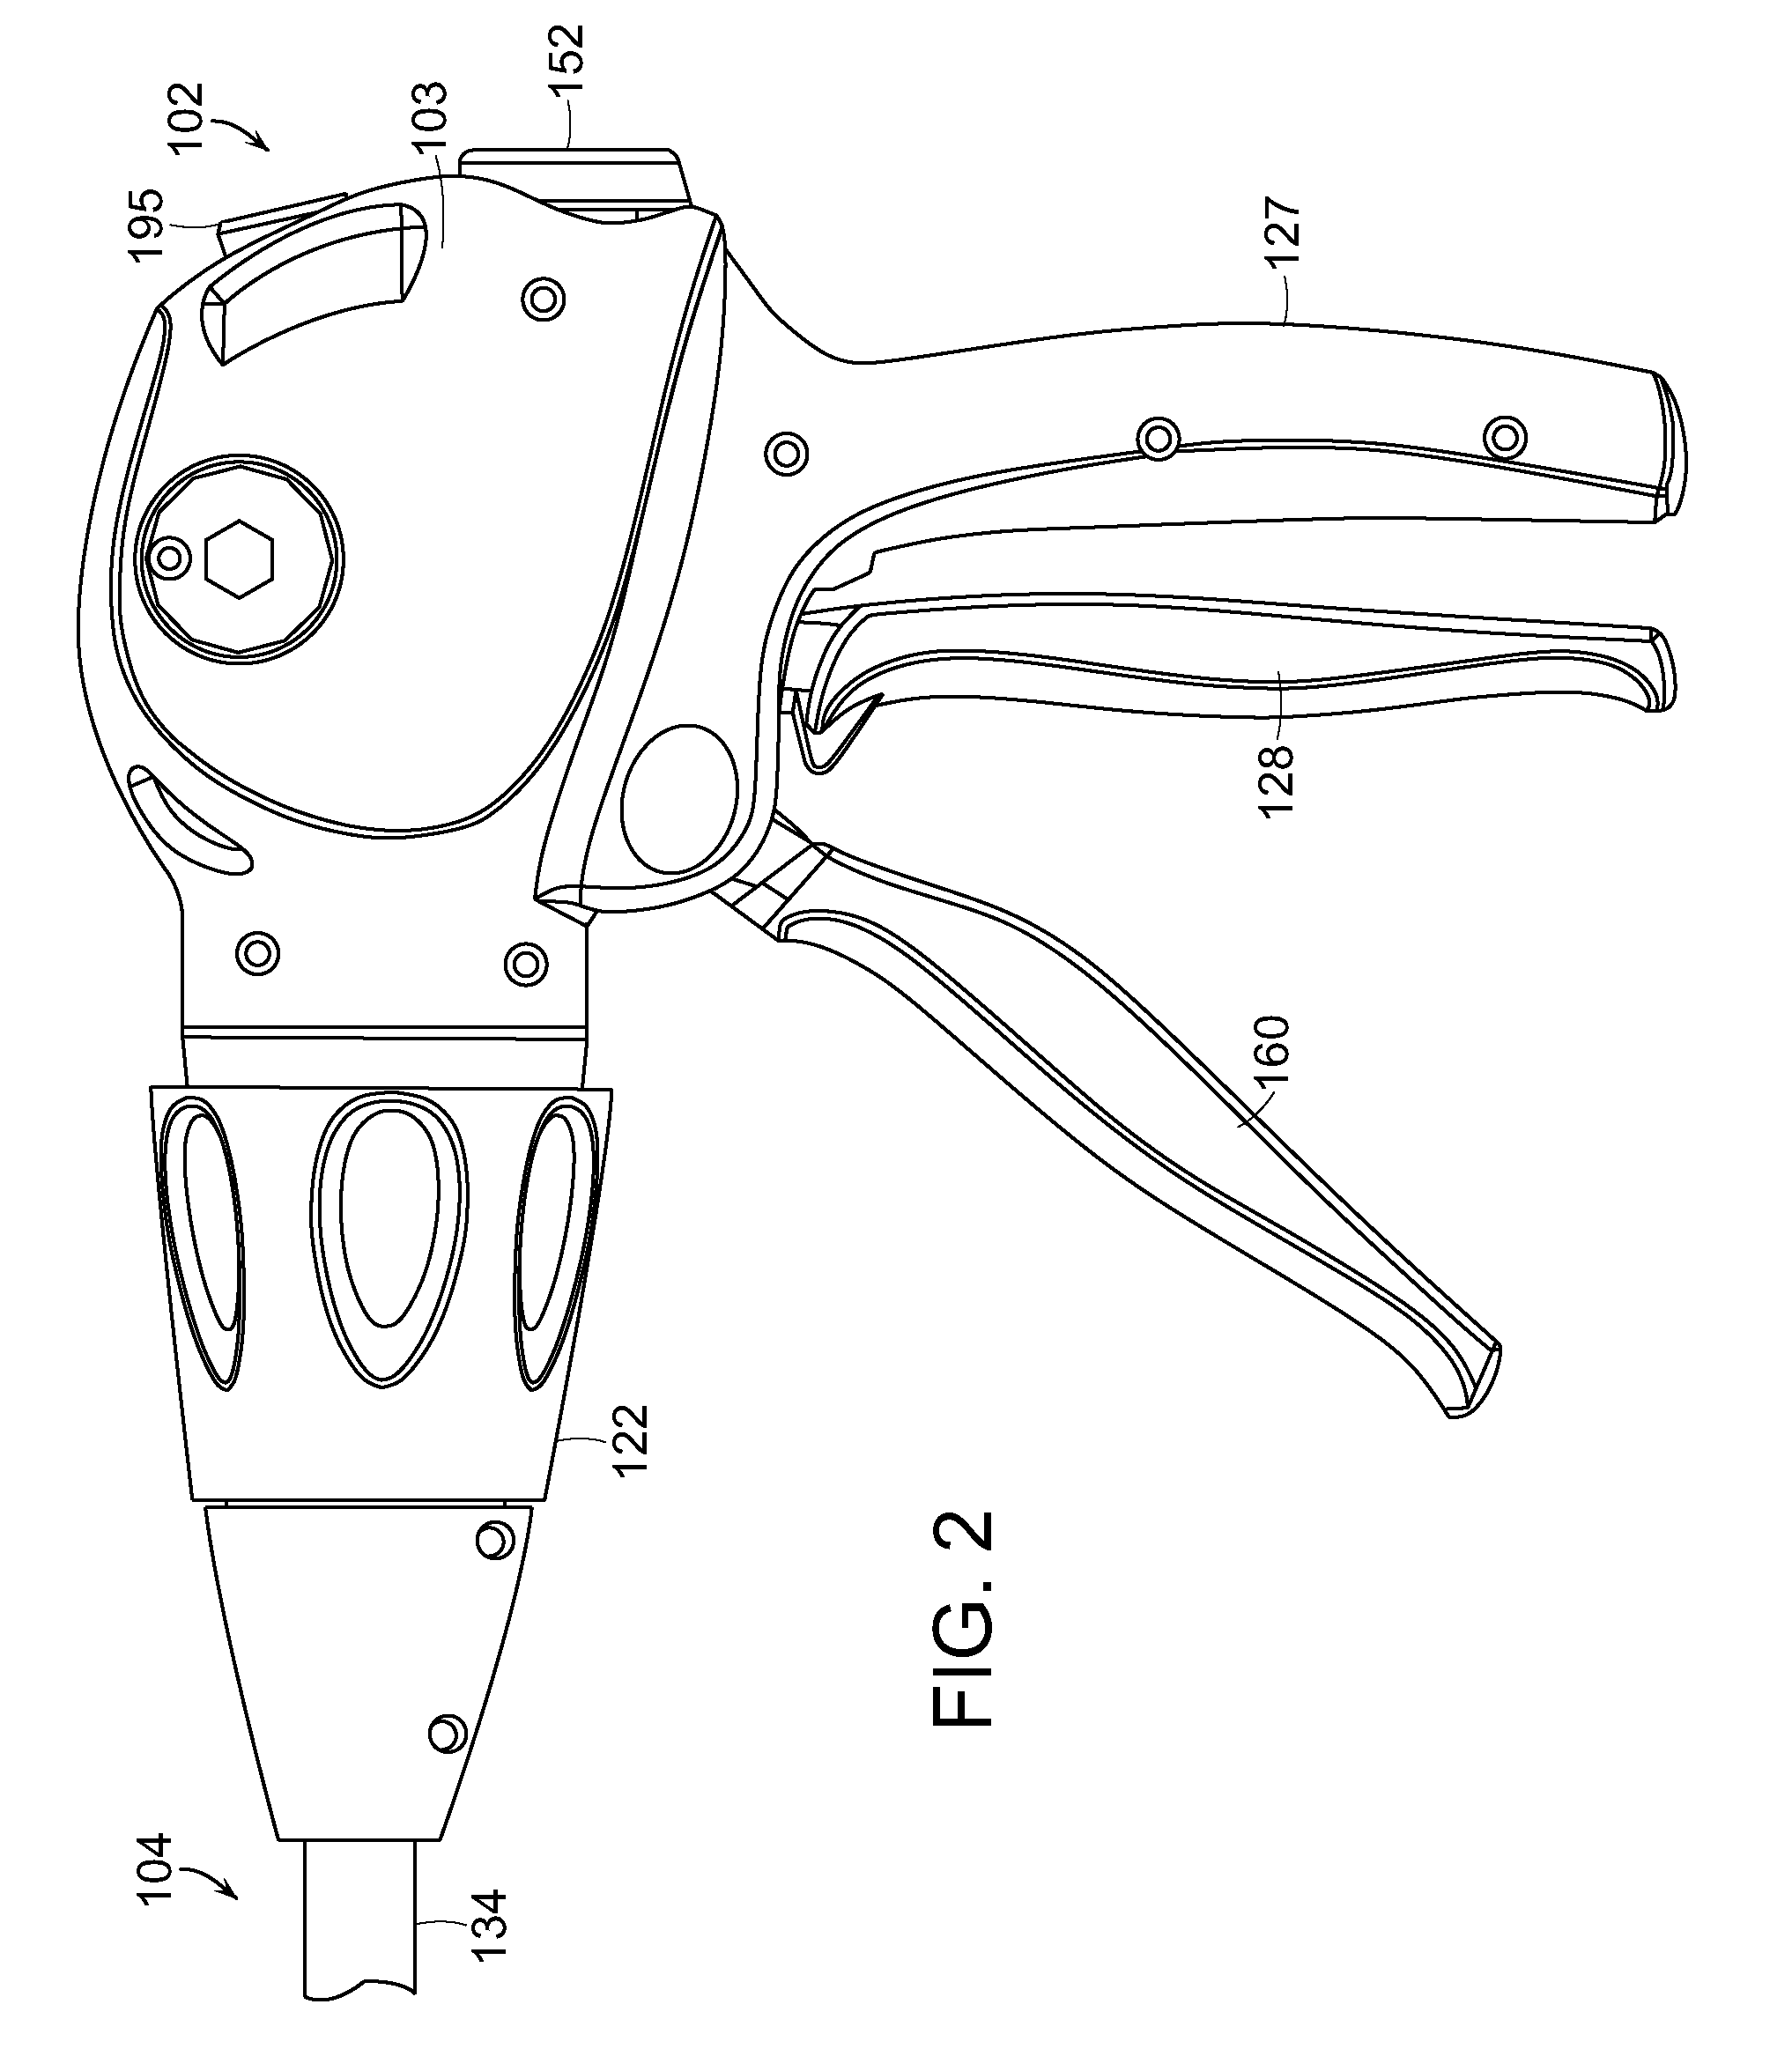 Surgical stapling instrument with an articulatable end effector